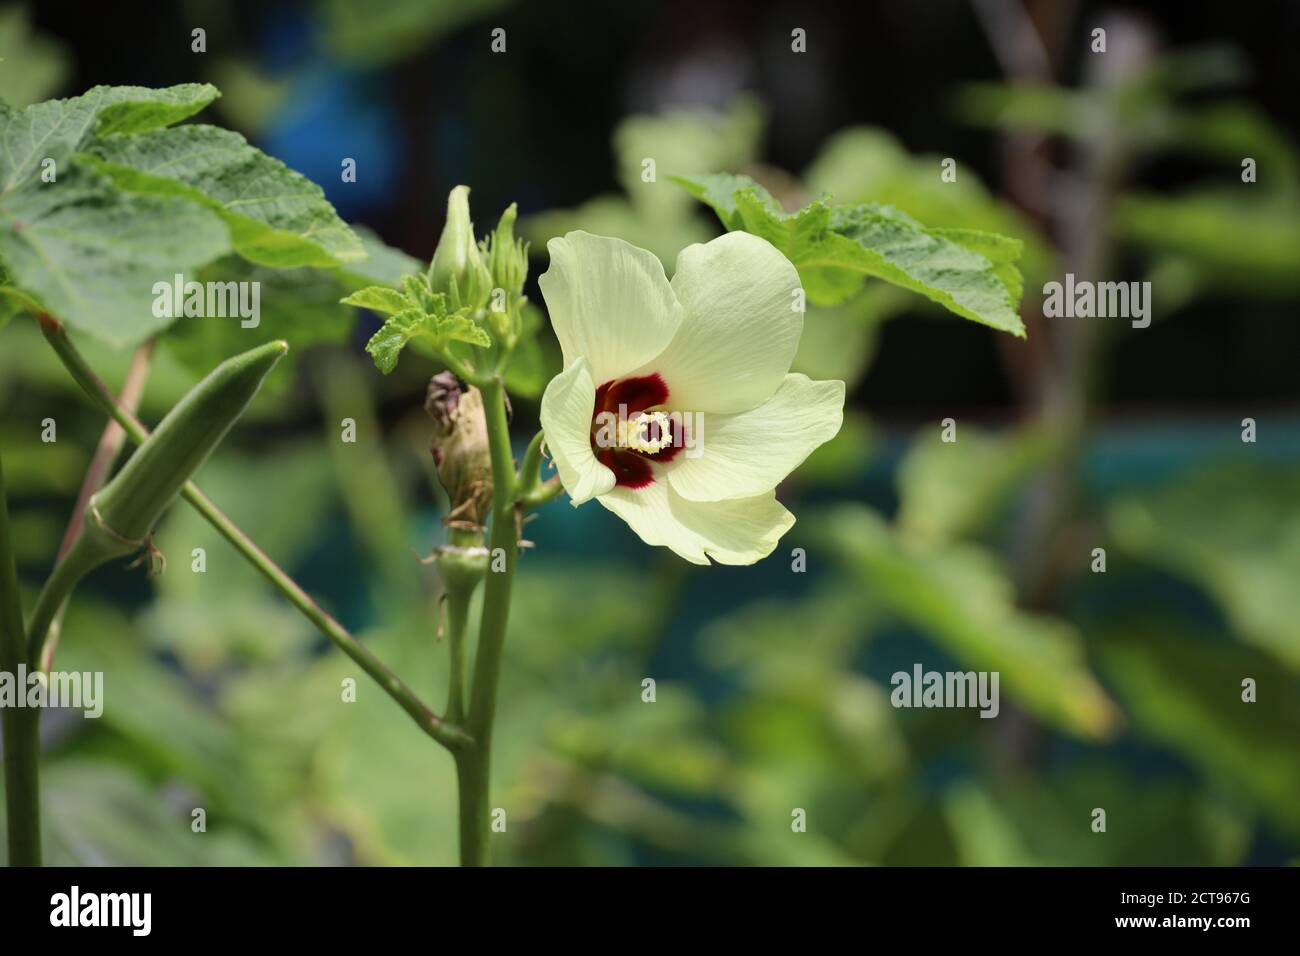 Homegrown and organic ladies finger or okra plant Stock Photo